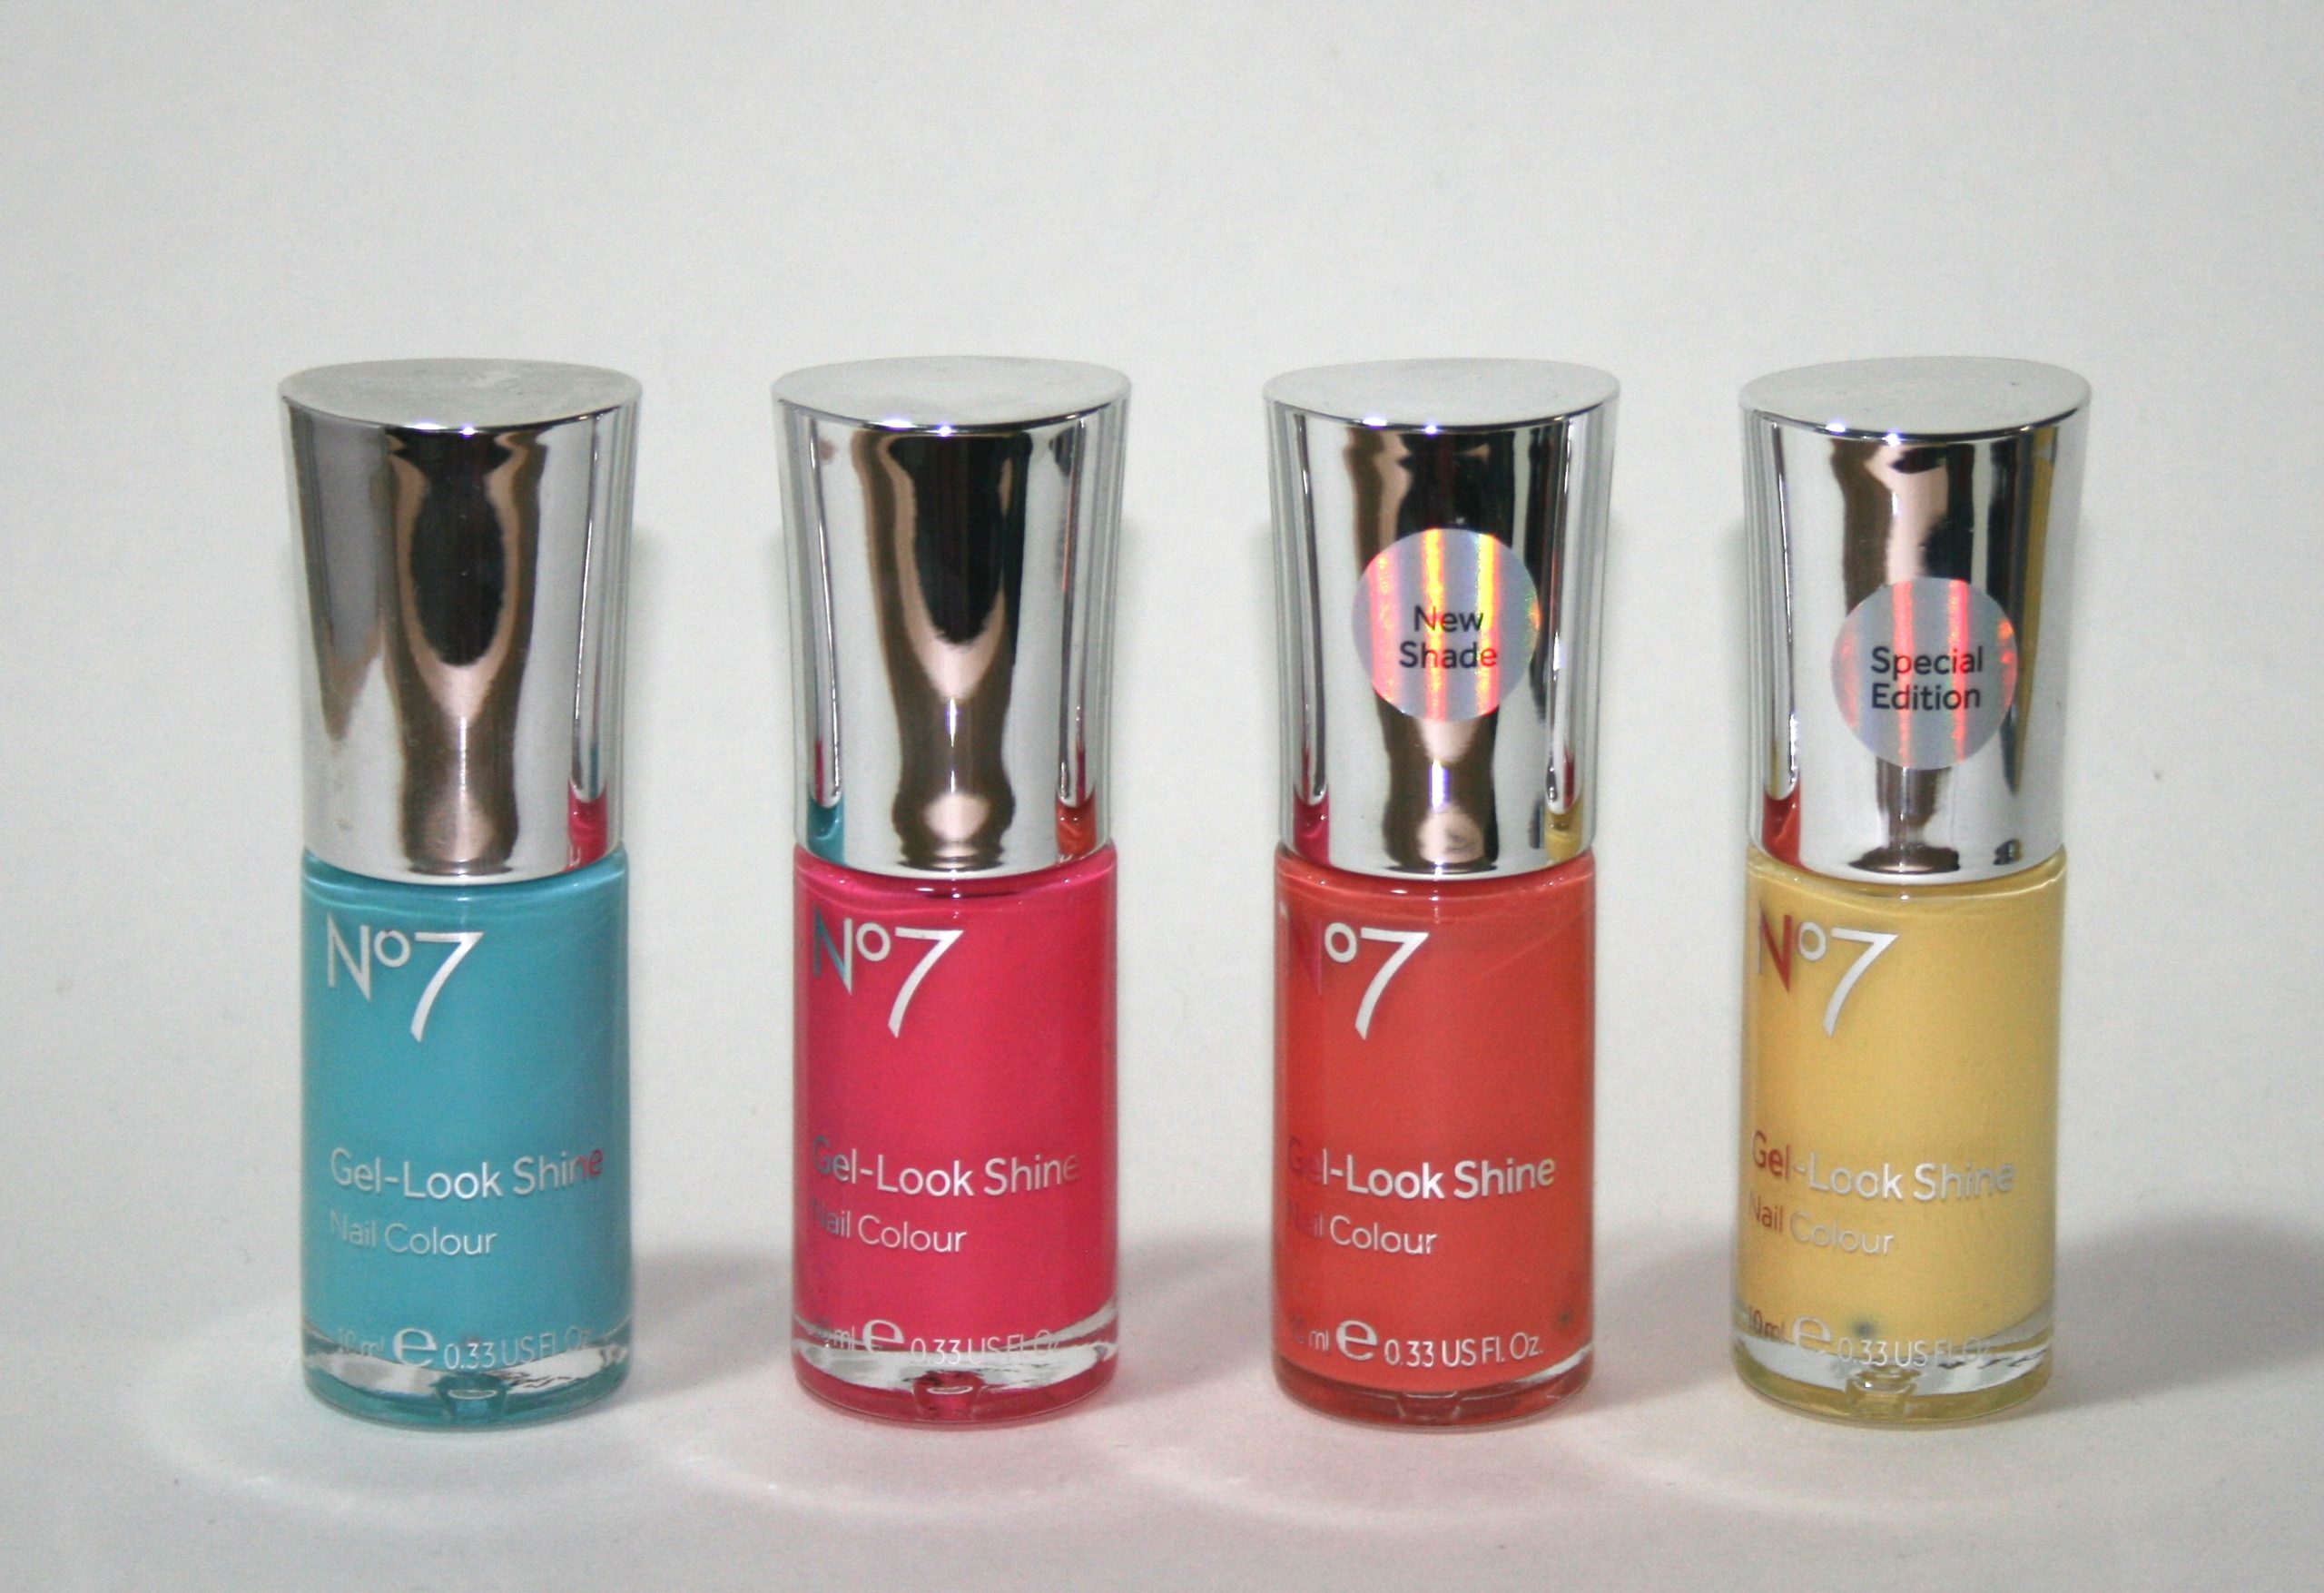 Boots No7 Gel-Look Shine Summer Colours